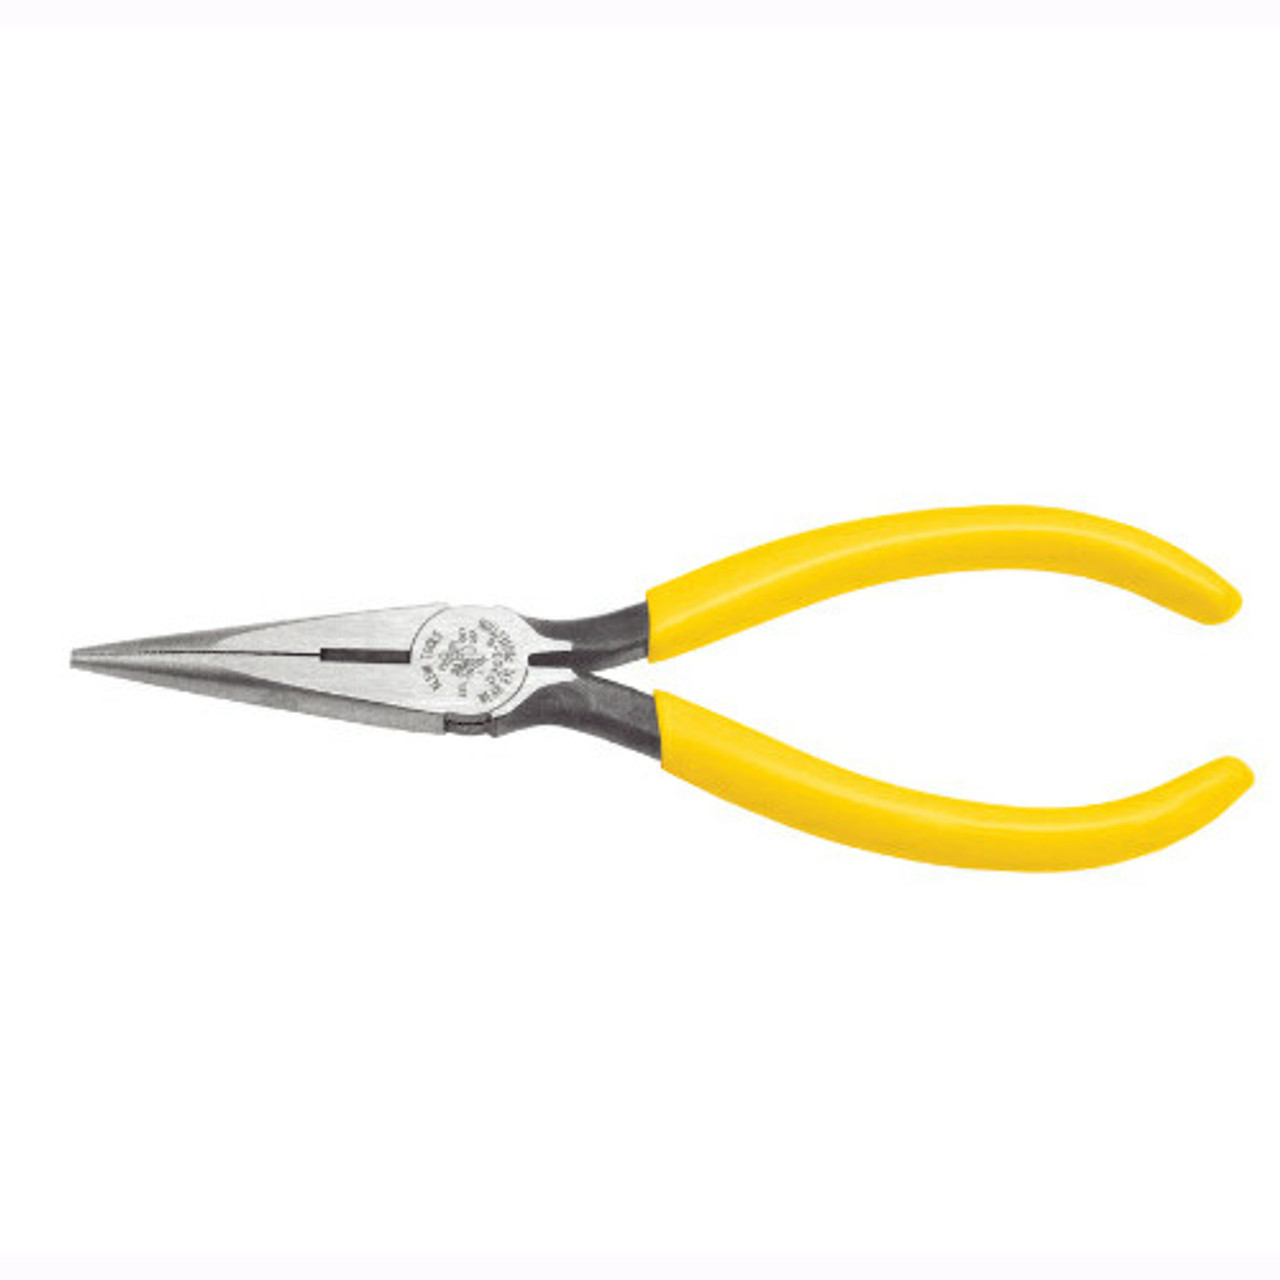 Klein Tools D203-6 - Side-Cutters, Long Nose 6-Inch